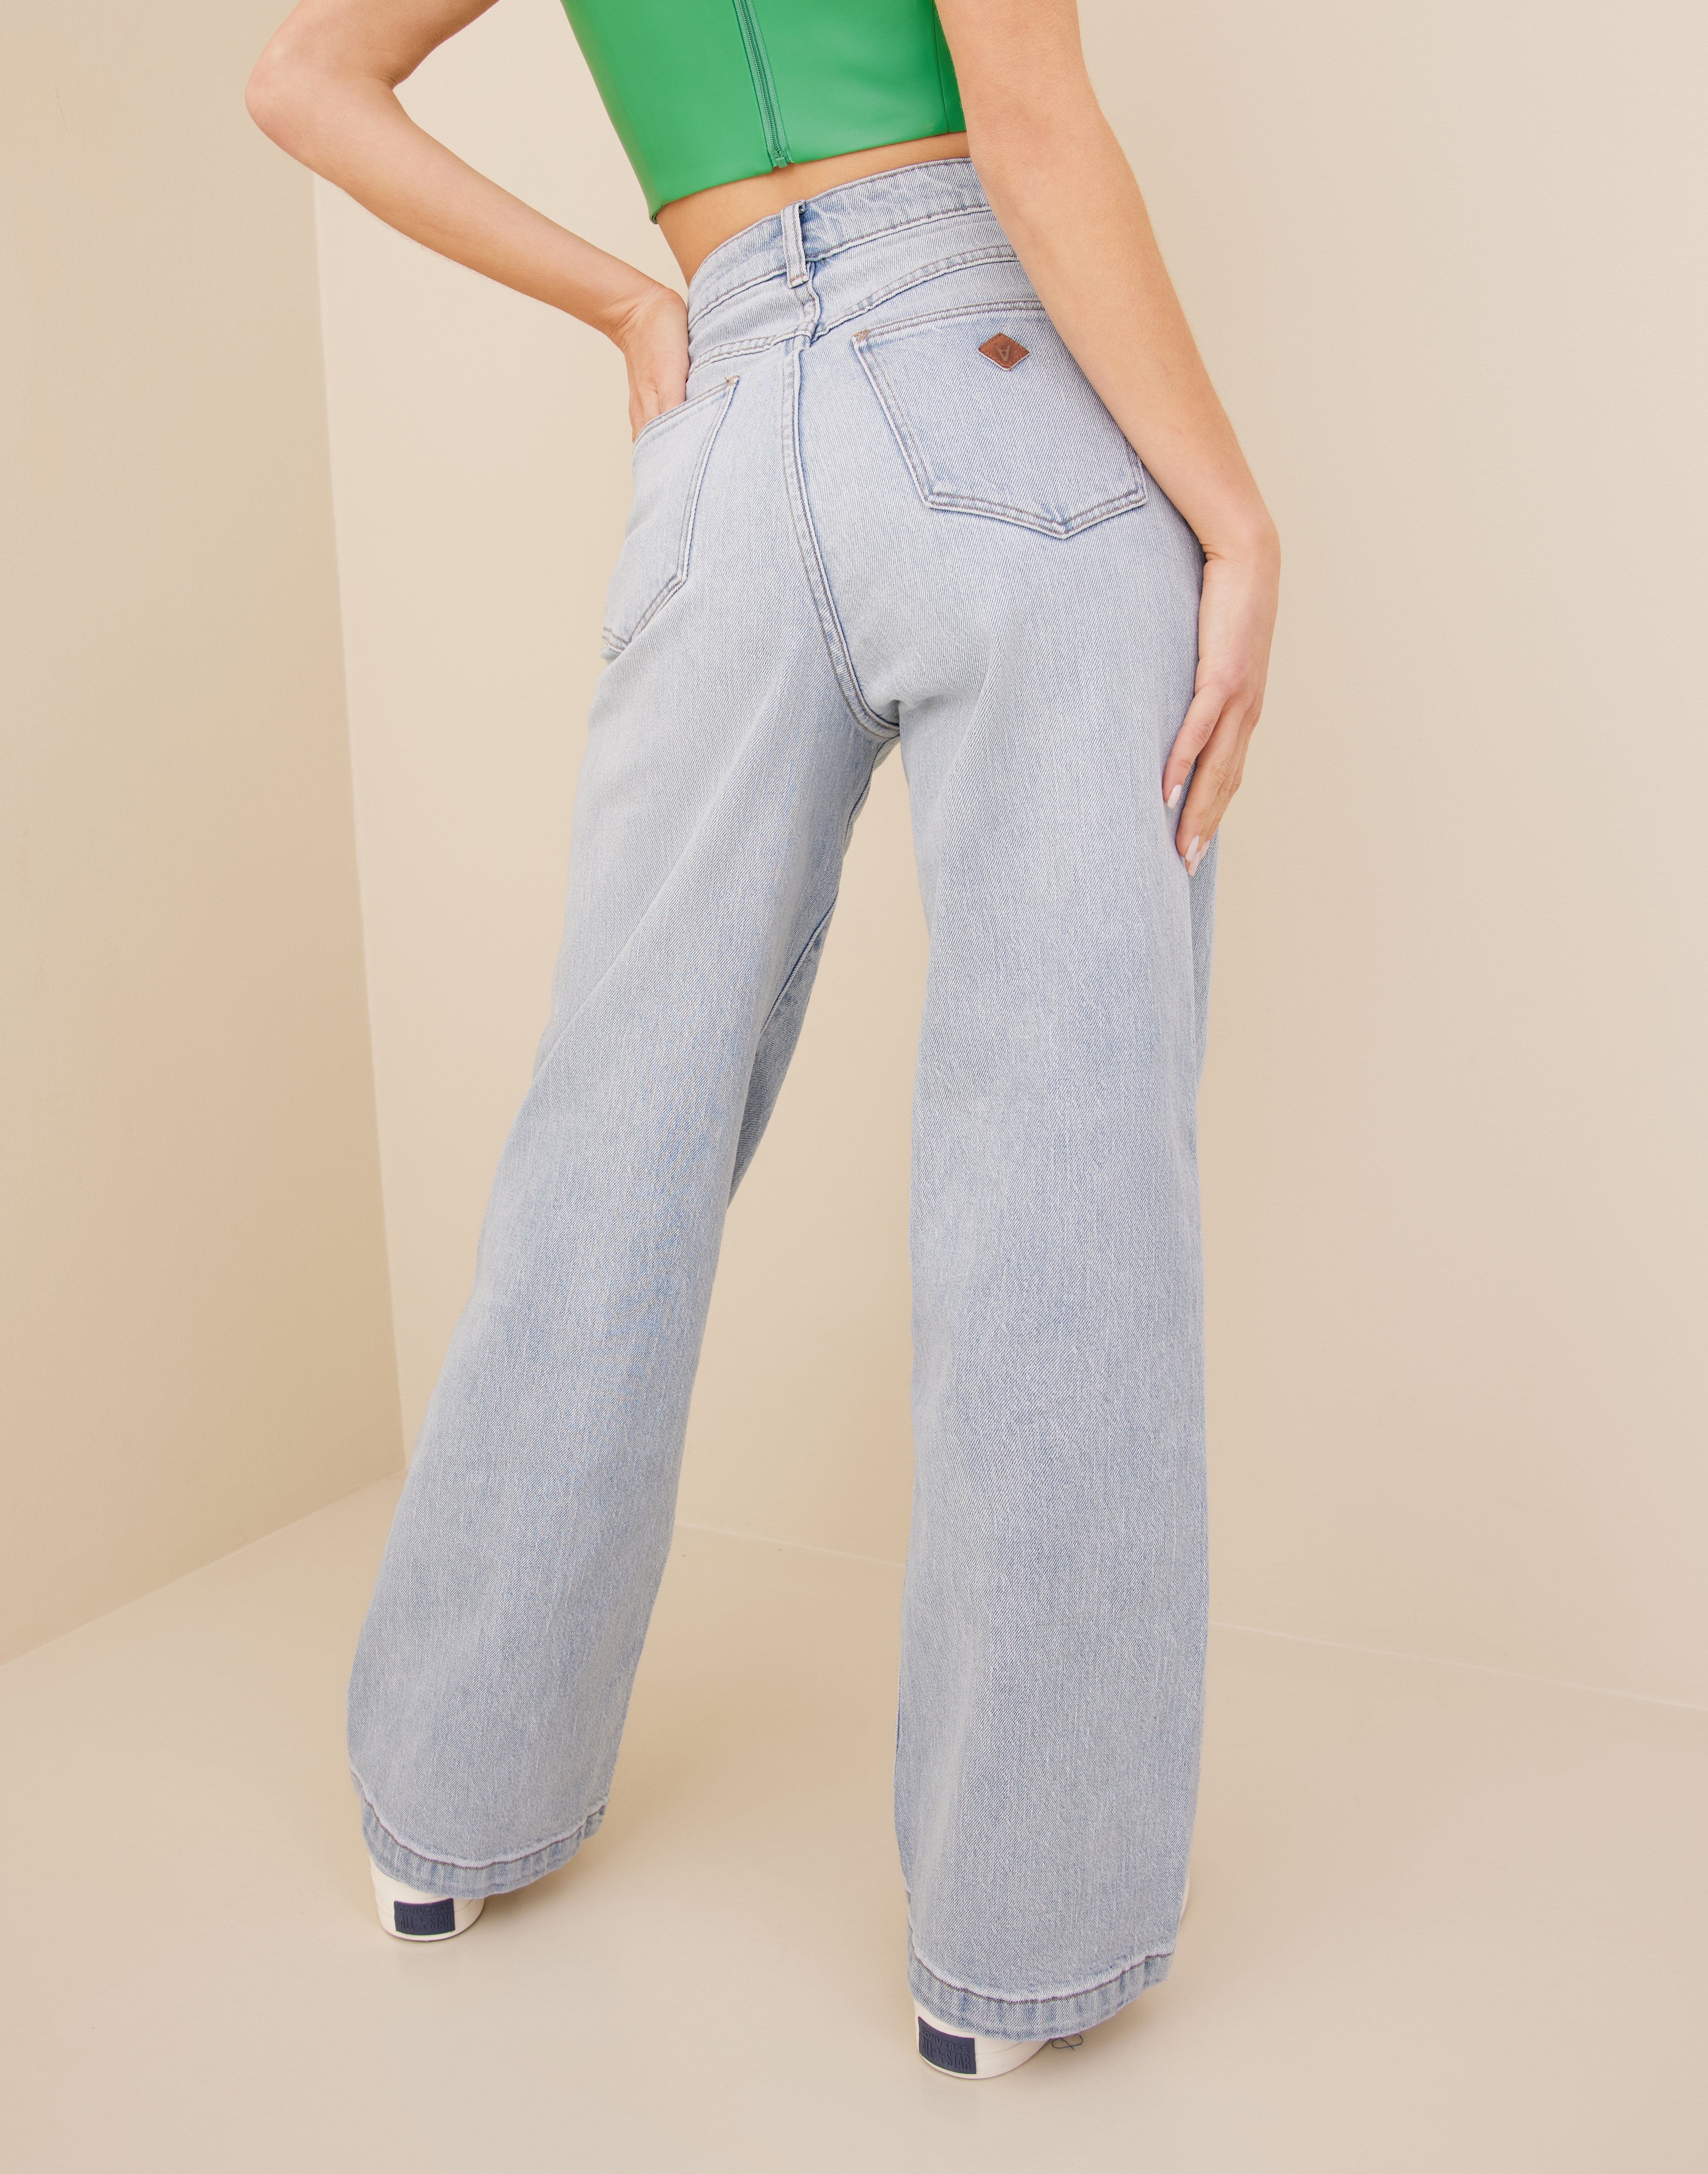 Abrand Jeans - High waisted jeans - A '94 High & Wide Grace - Jeans